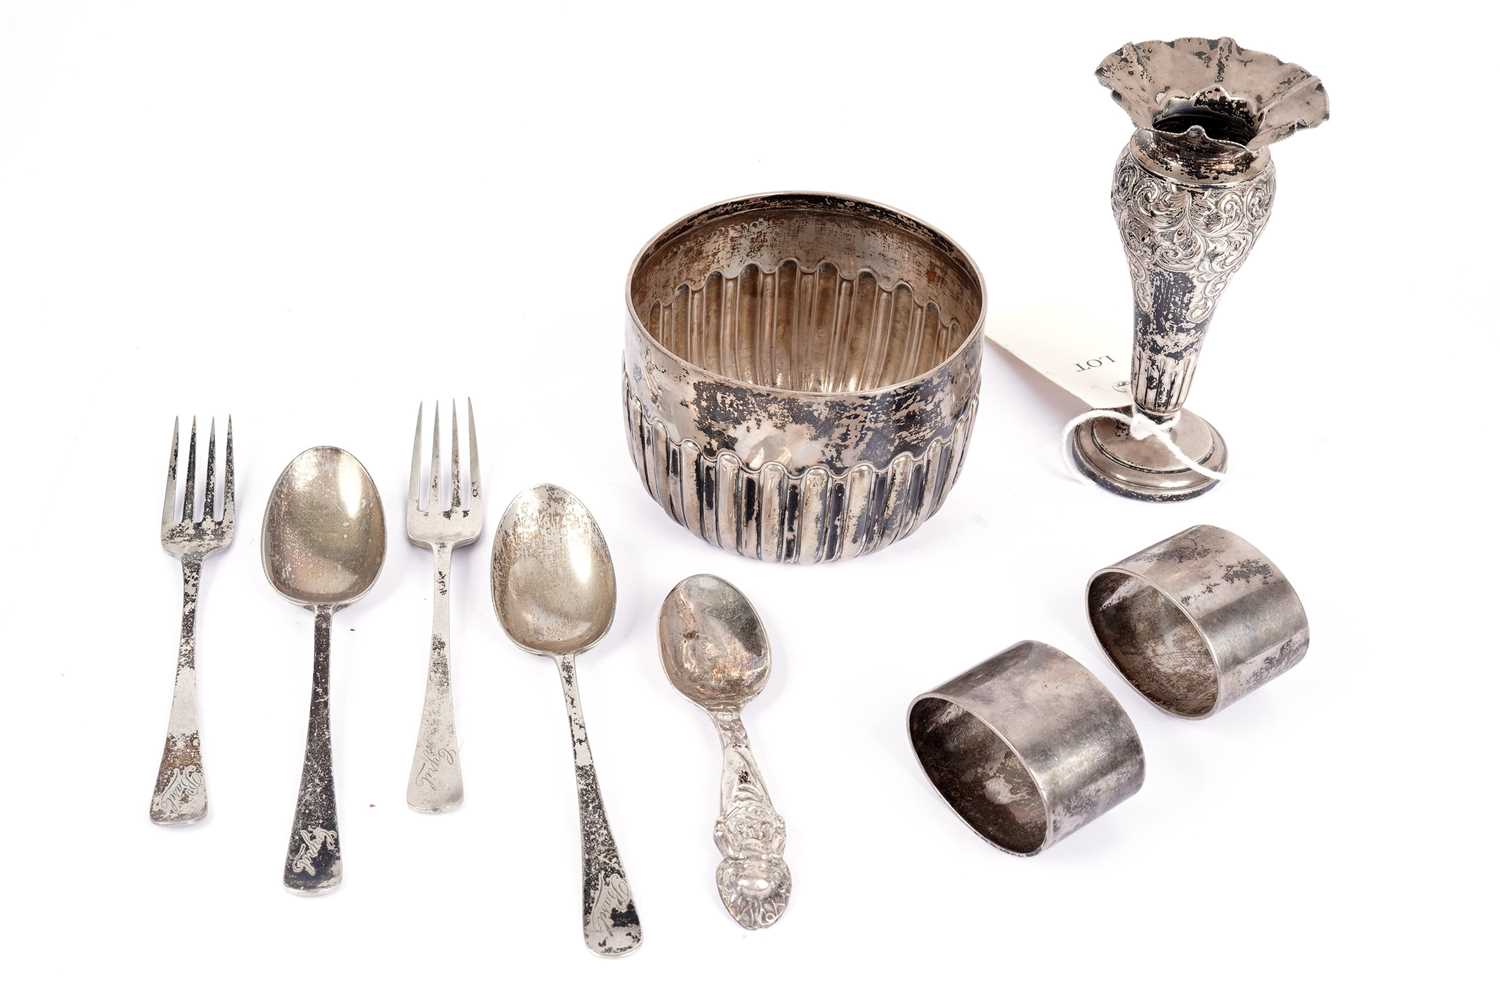 Edwardian silver christening sets and a spill vase